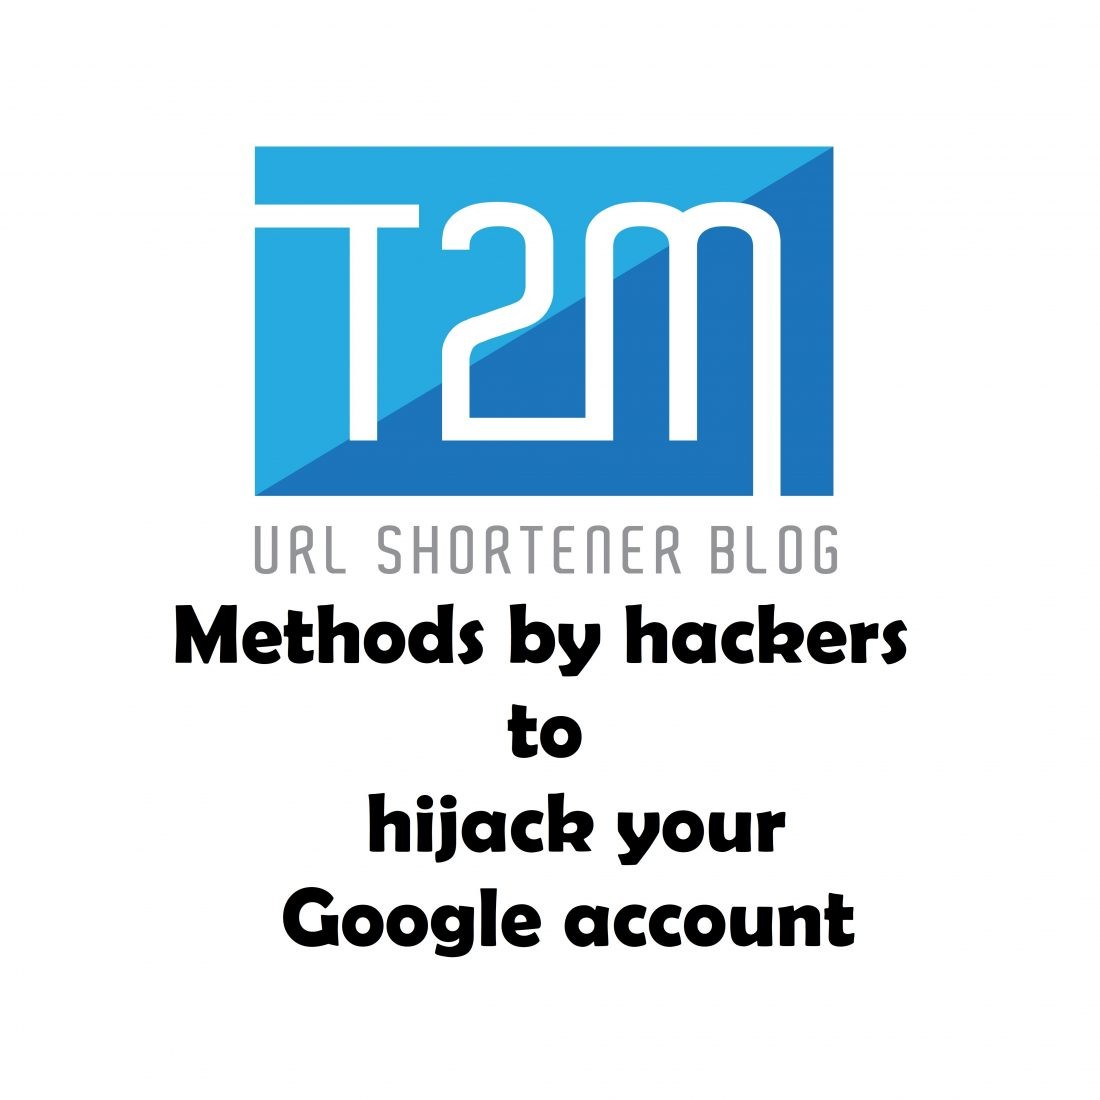 What are the 3 most used methods by hackers to hijack your Google account?